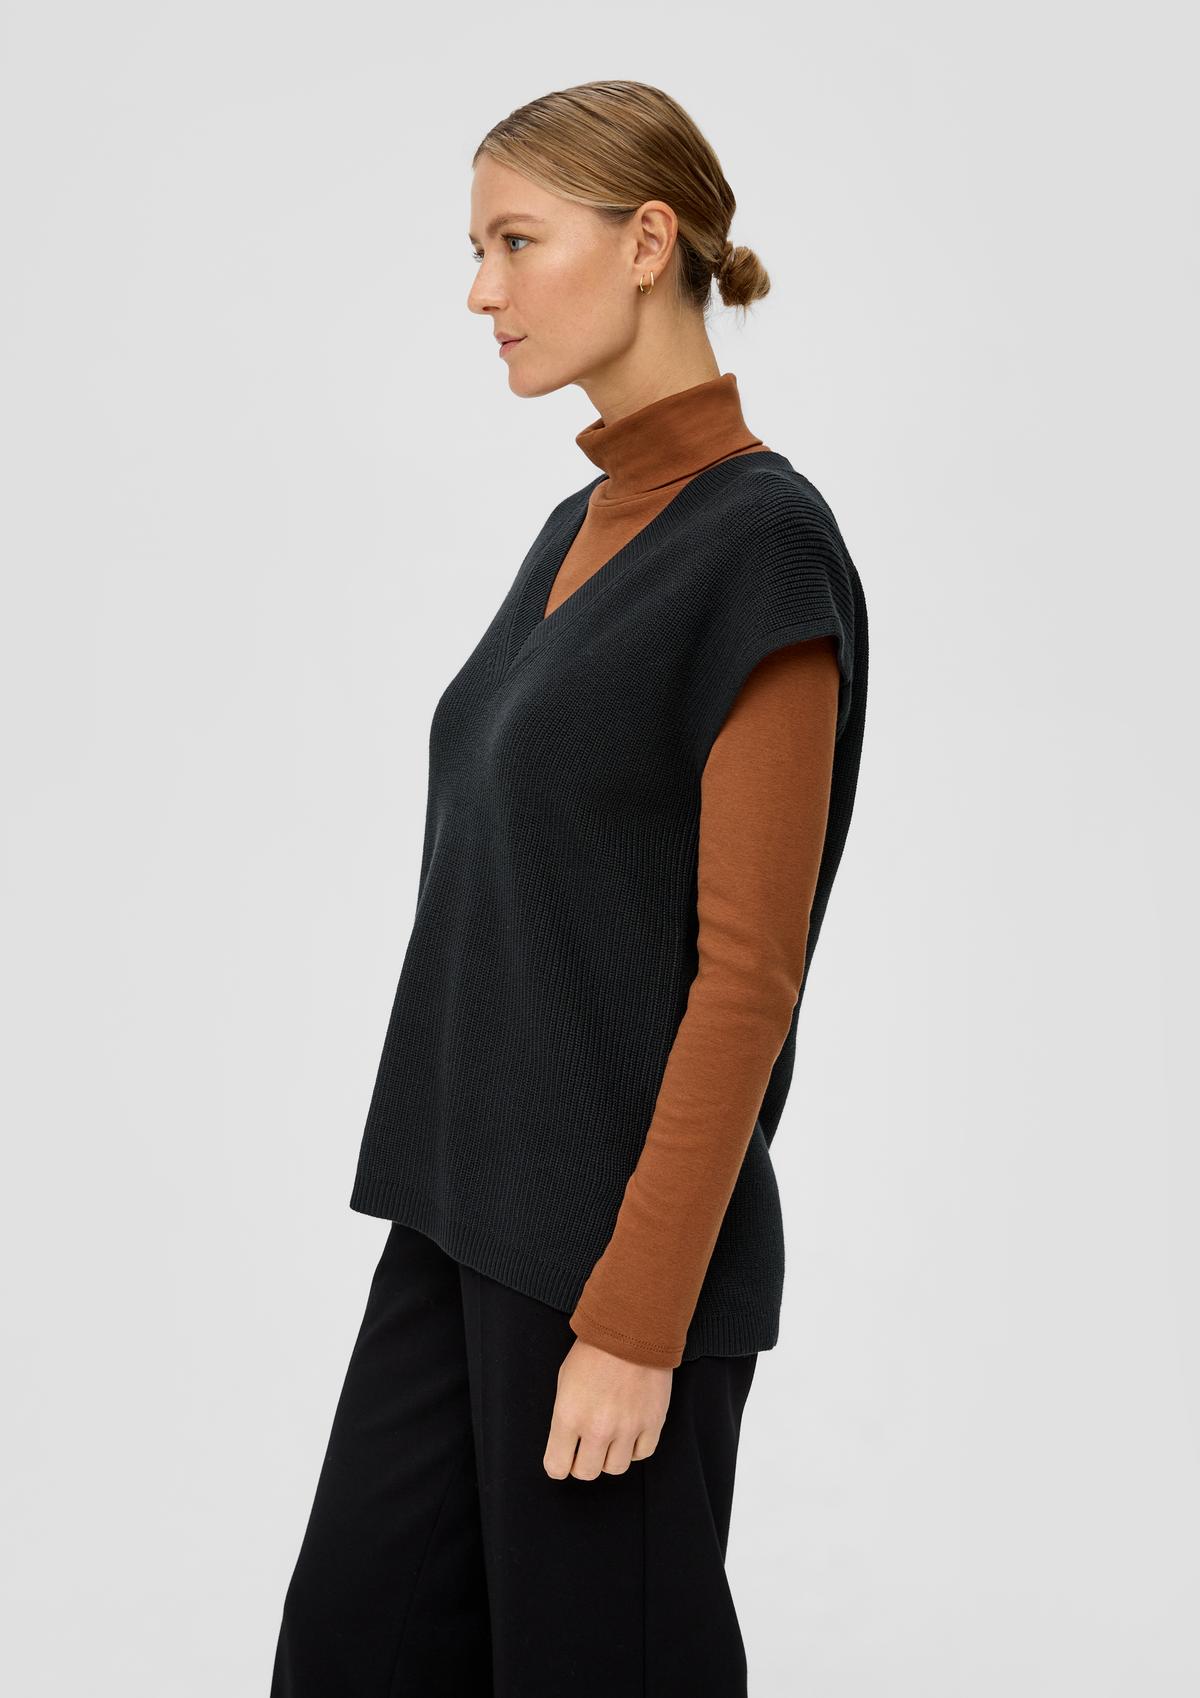 Loose-fitting knitted slipover